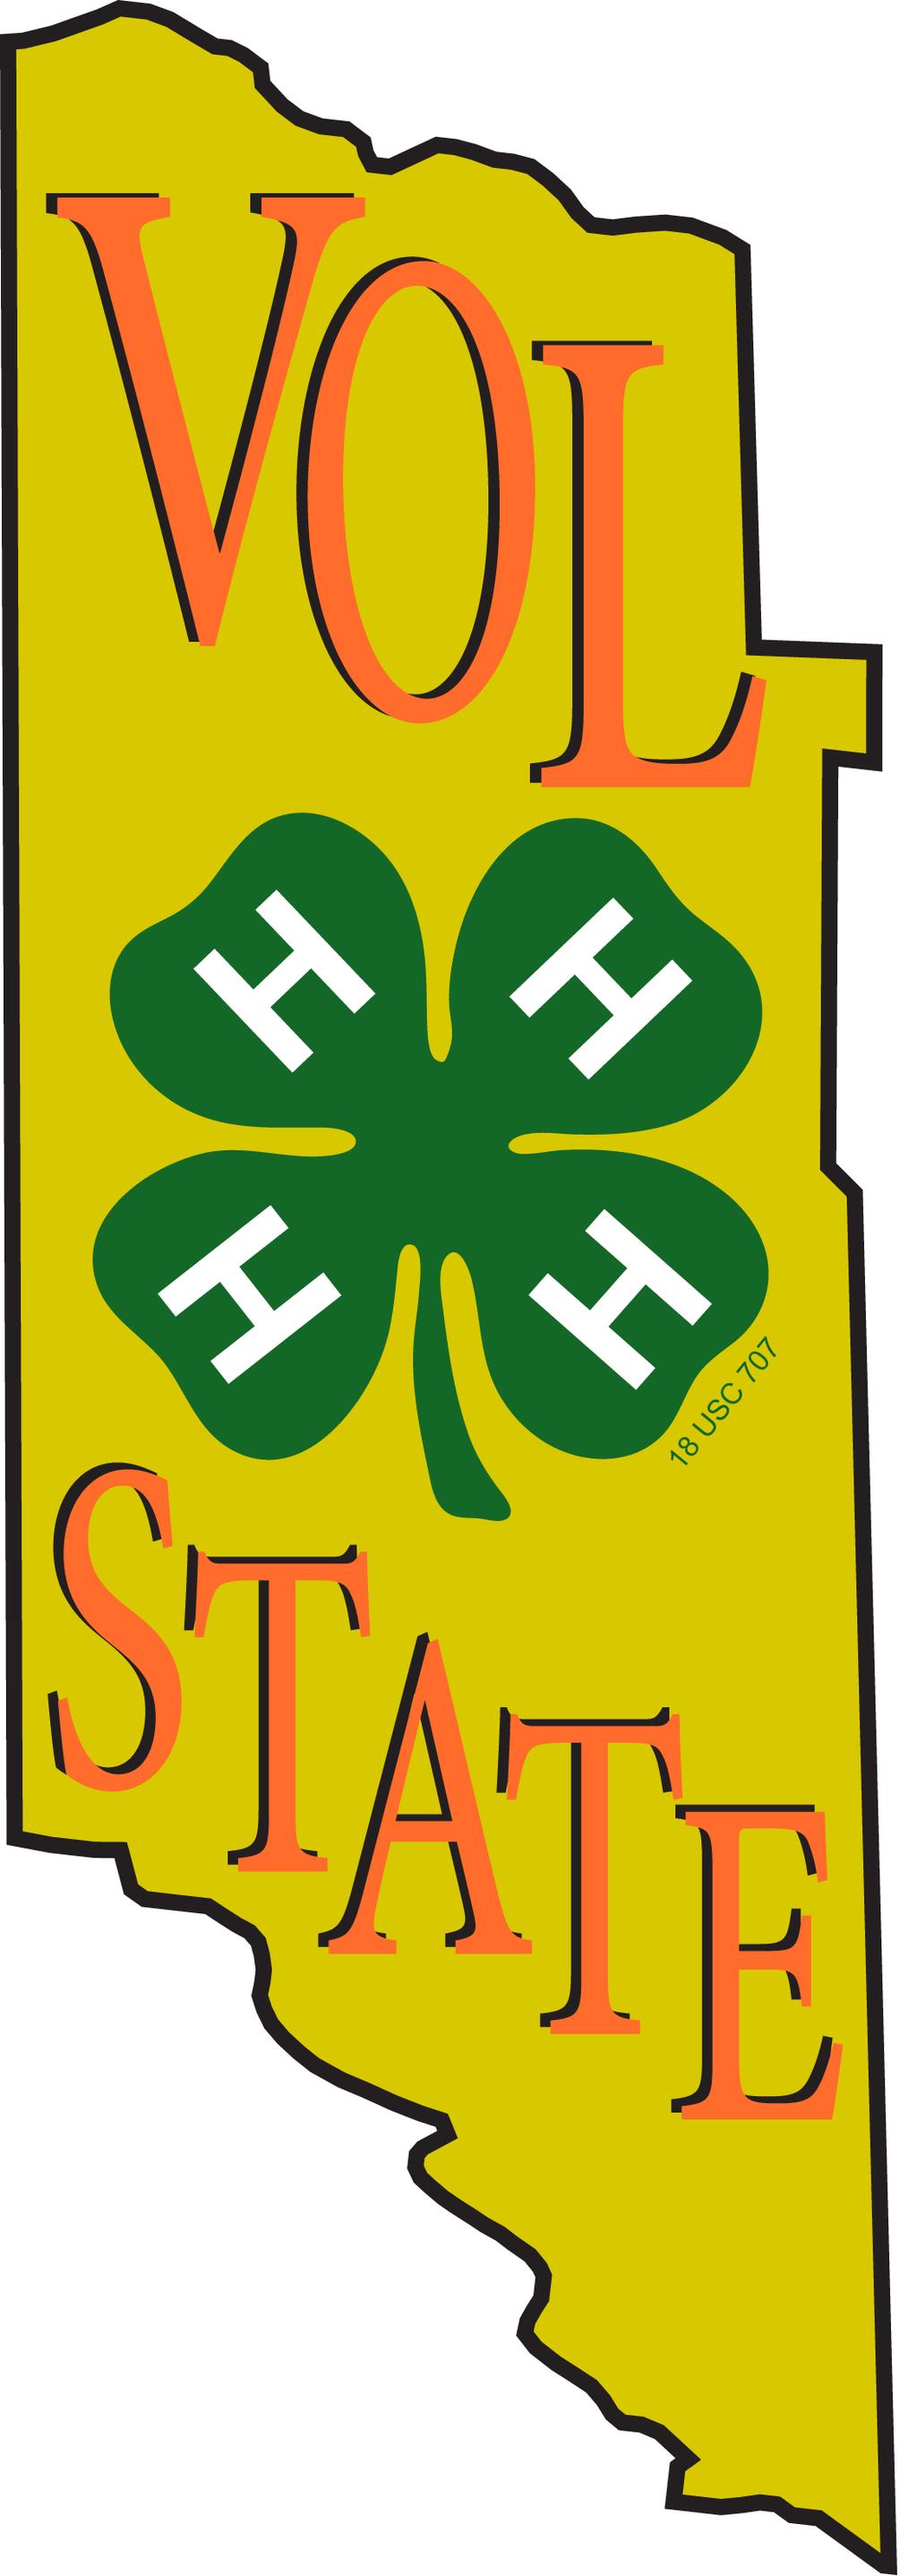 Vol State Nominations Due All counties have the opportunity to nominate outstanding 4-H members to receive Tennessee s highest level of recognition, the Vol State Award.